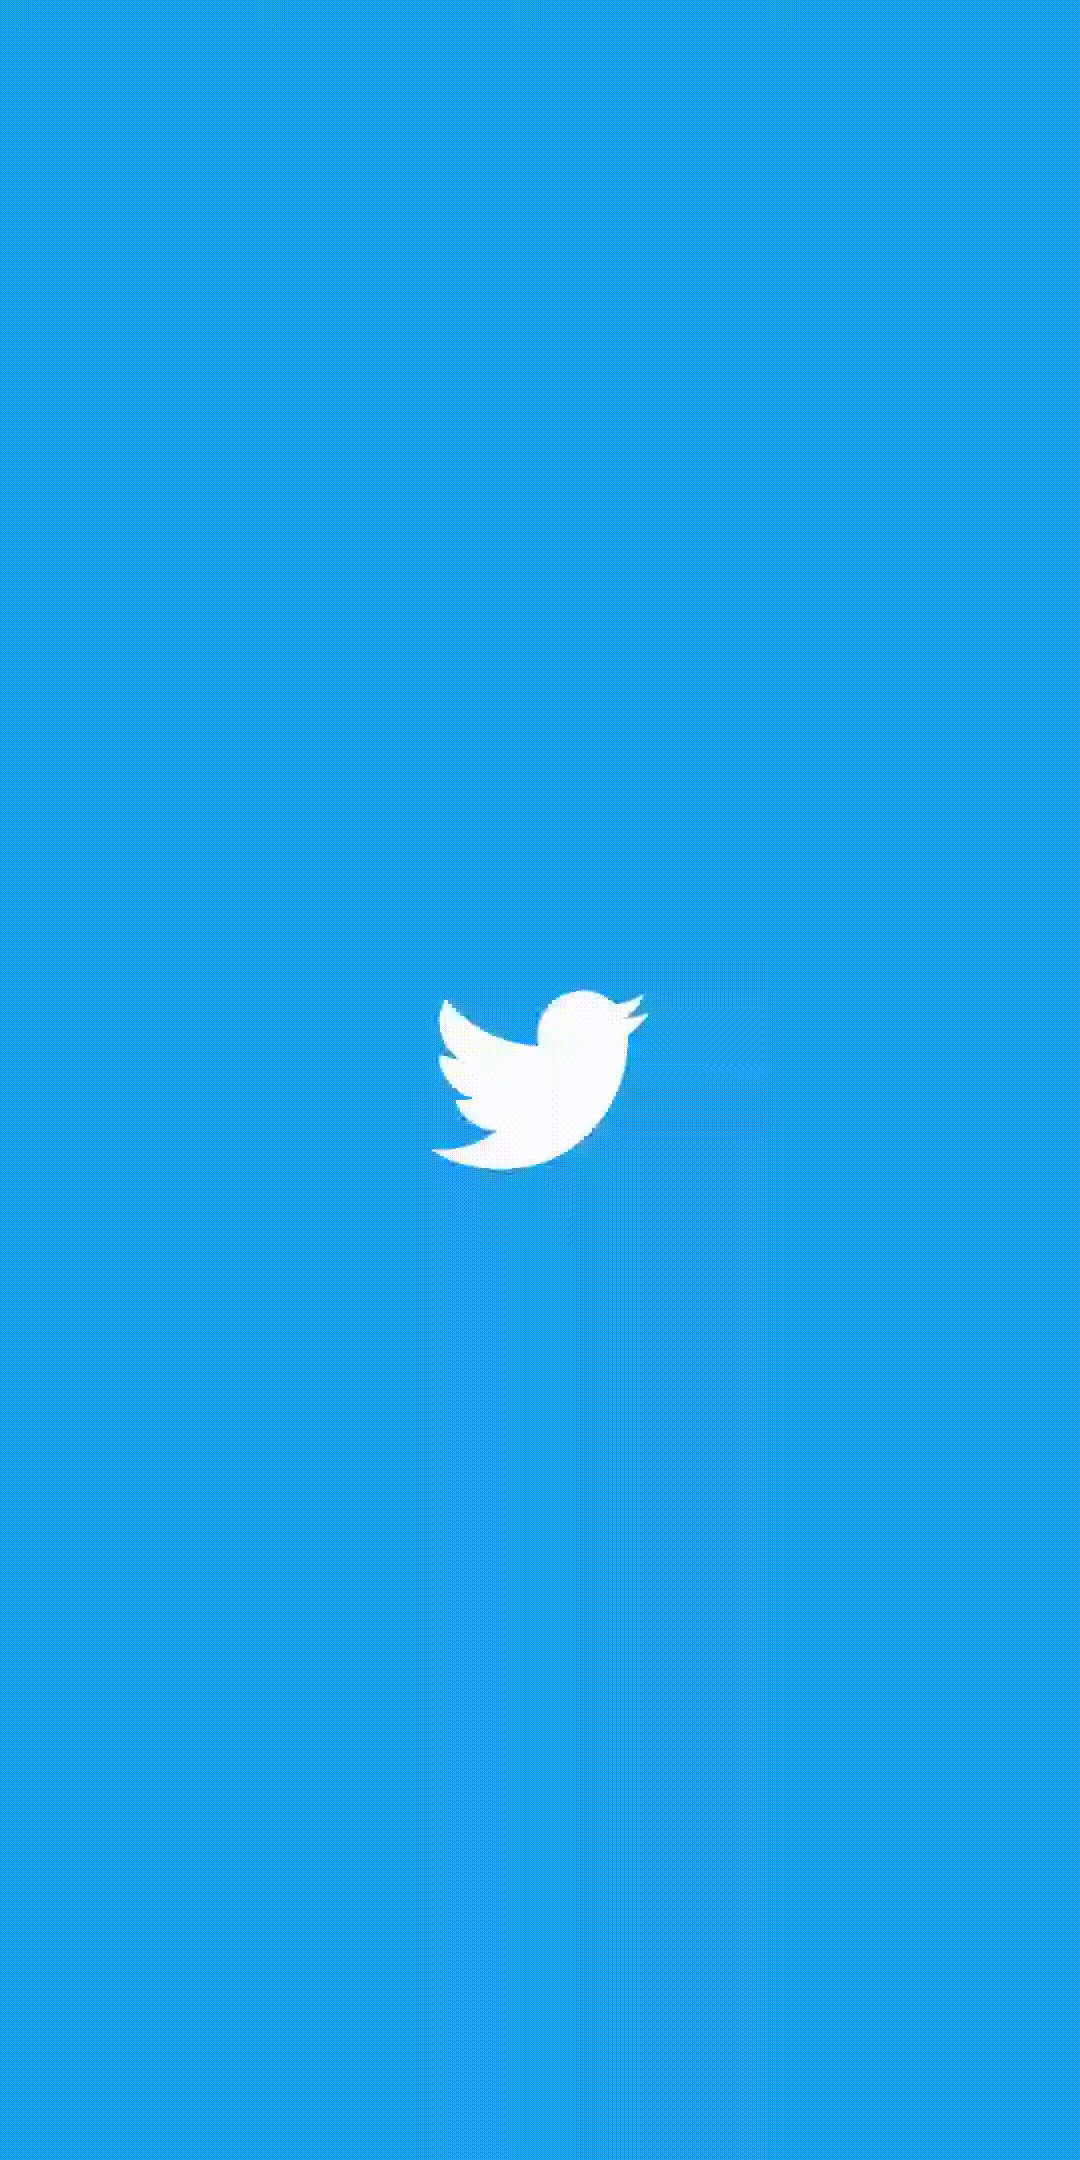 Android MotionLayout: Creating the Twitter splash screen in the simplest  way possible (Part II)